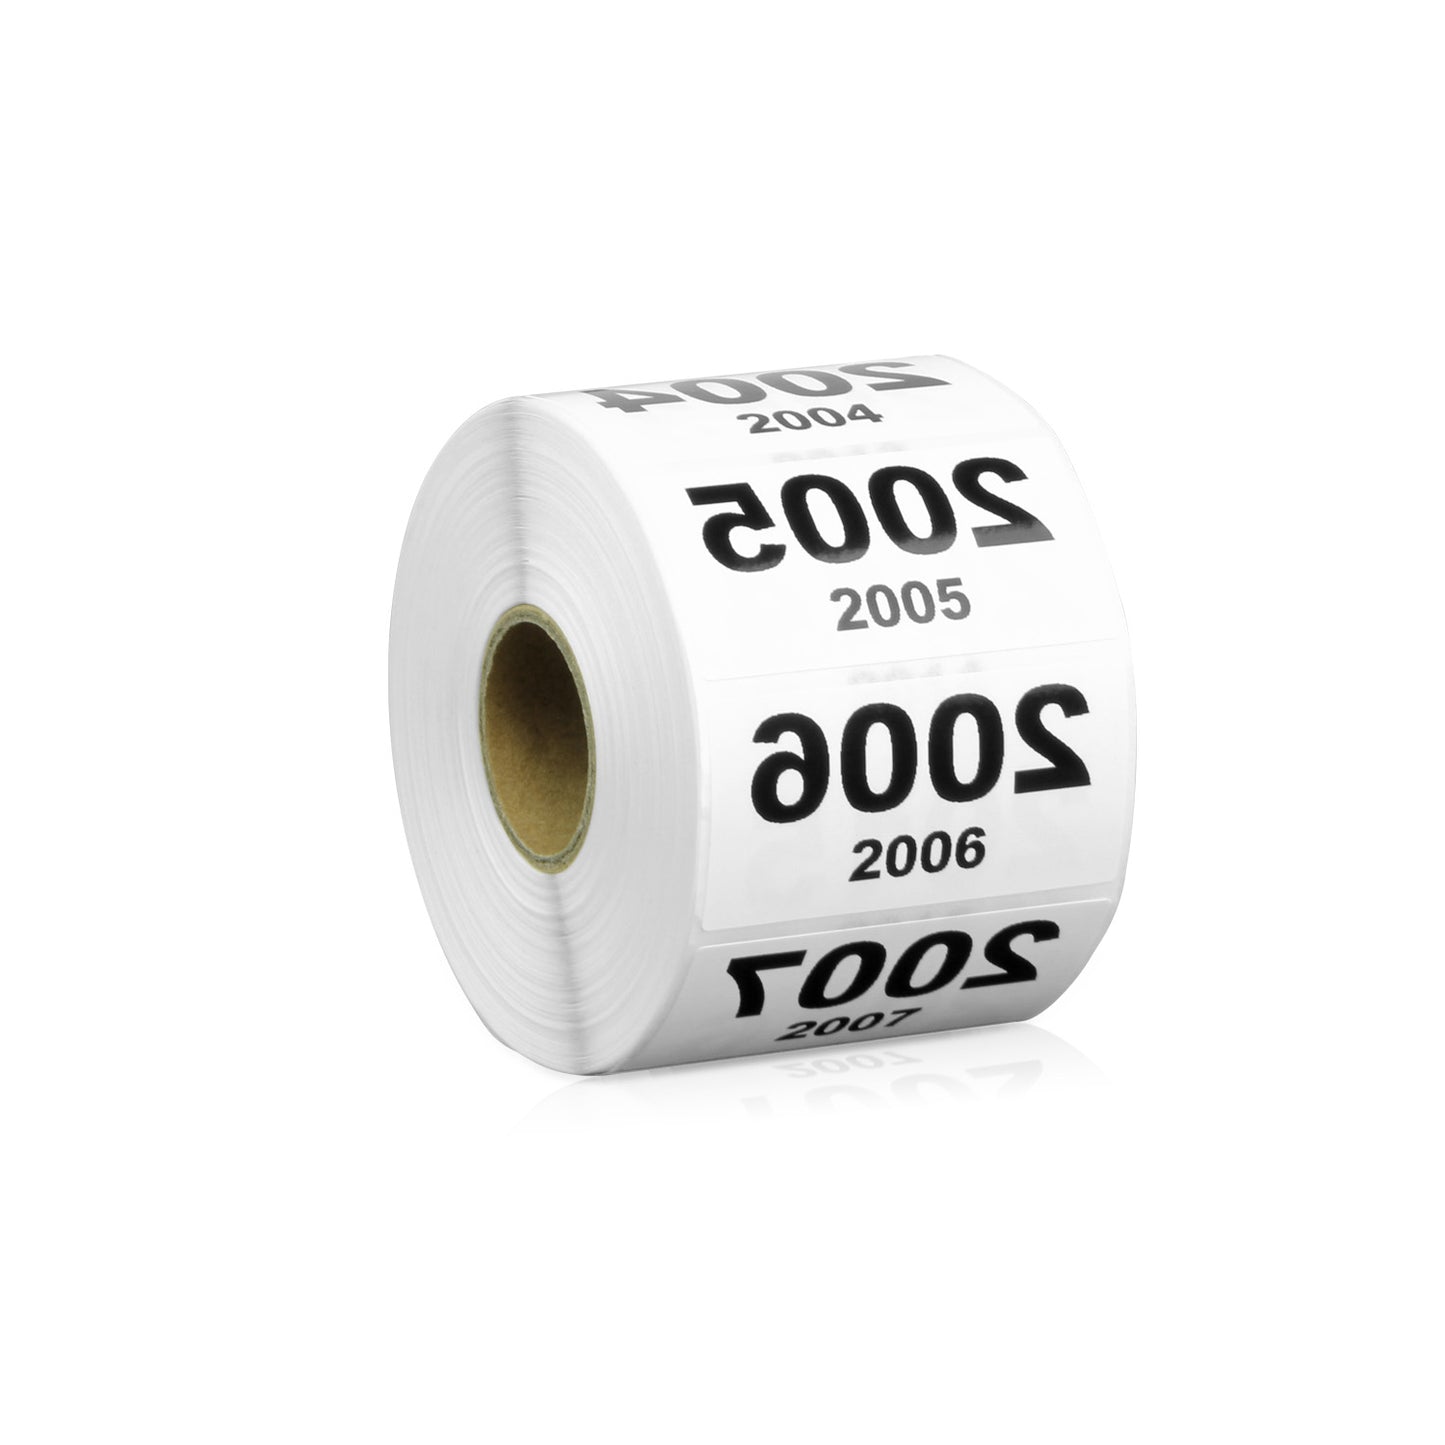 2 x 1 inch | Inventory: Reverse Numbered "2001-3000" Consecutive Numbers Stickers